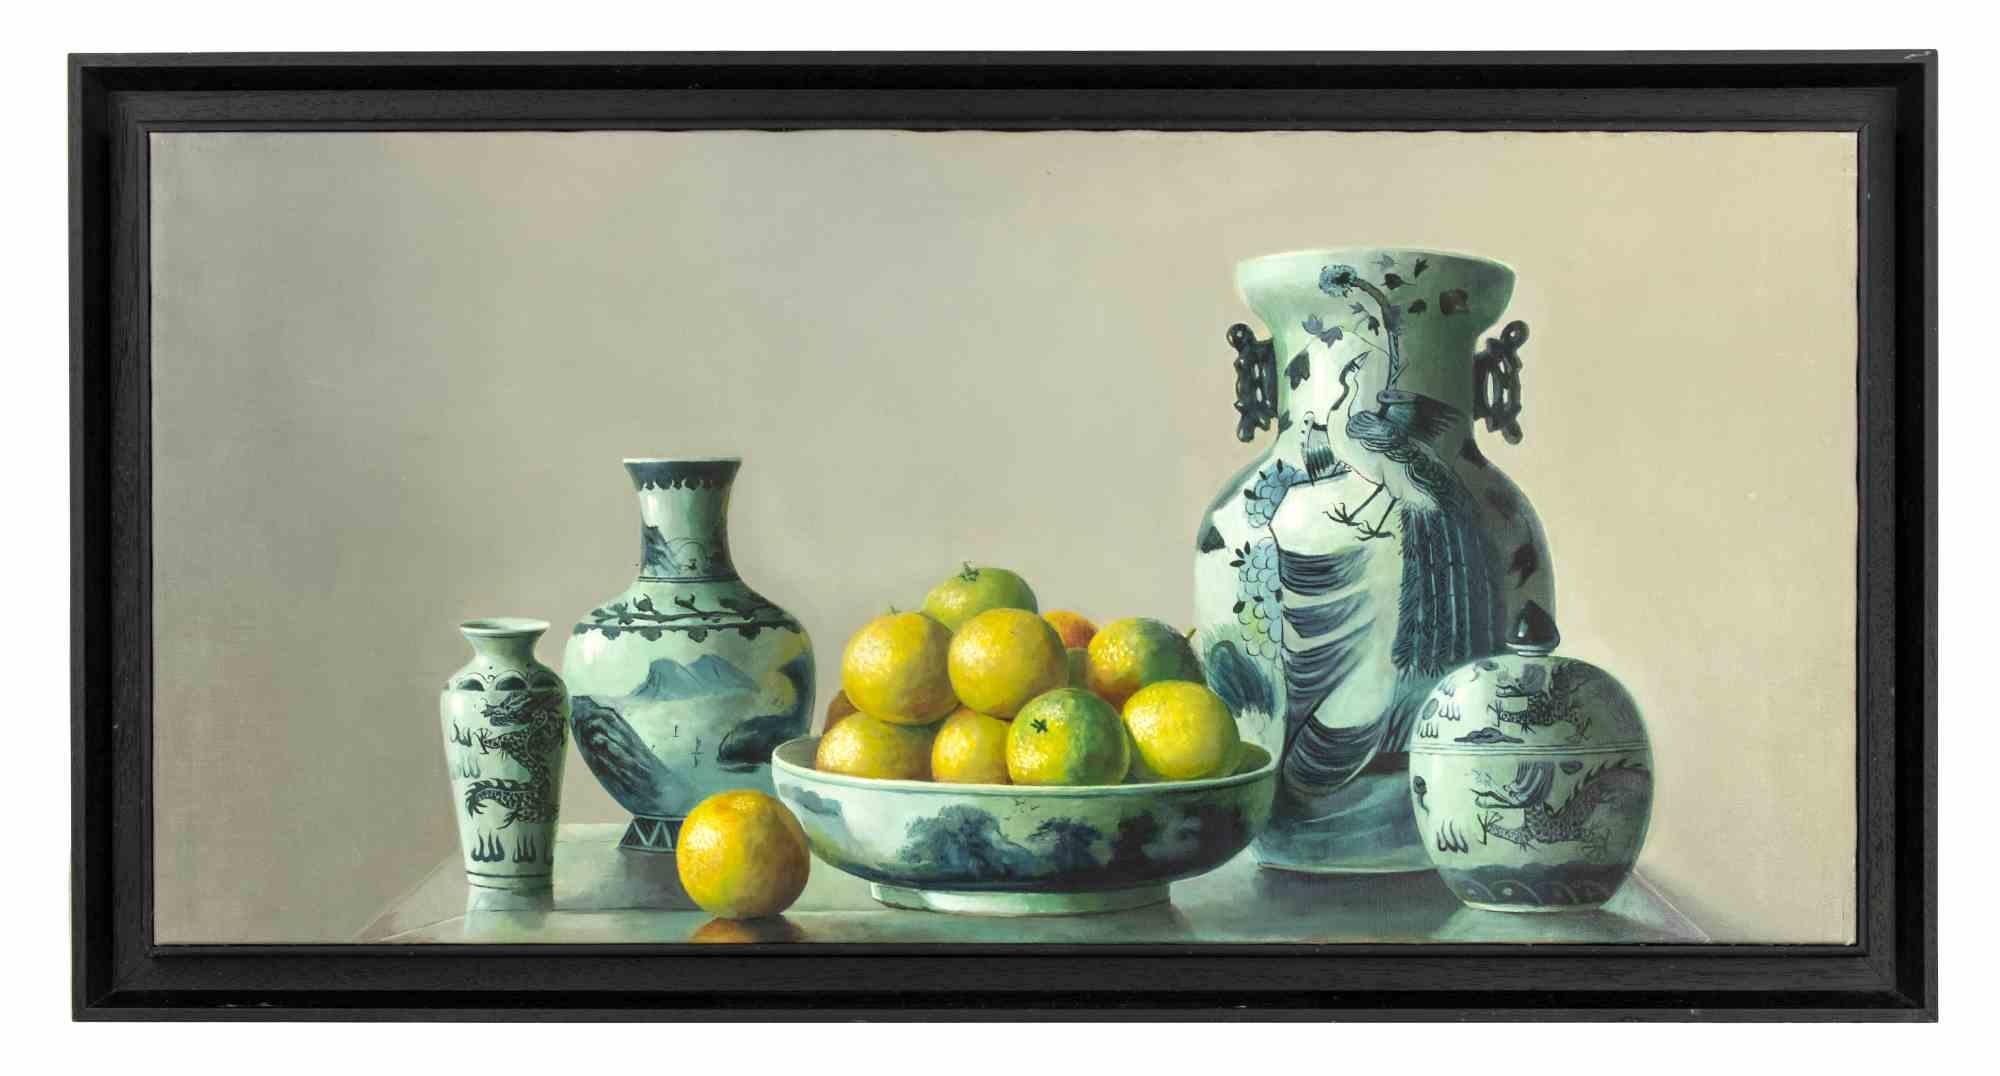 Oranges is an oil on canvas realized by the chinese painter Zhang Wei Guang (Mirror) in 2000s.

Includes frame: 51 x 97.5 cm

Zhang Wei Guang, also called ‘mirror' was born in Helong Jang, China in 1968. He studied at the Haierbin Teacher University